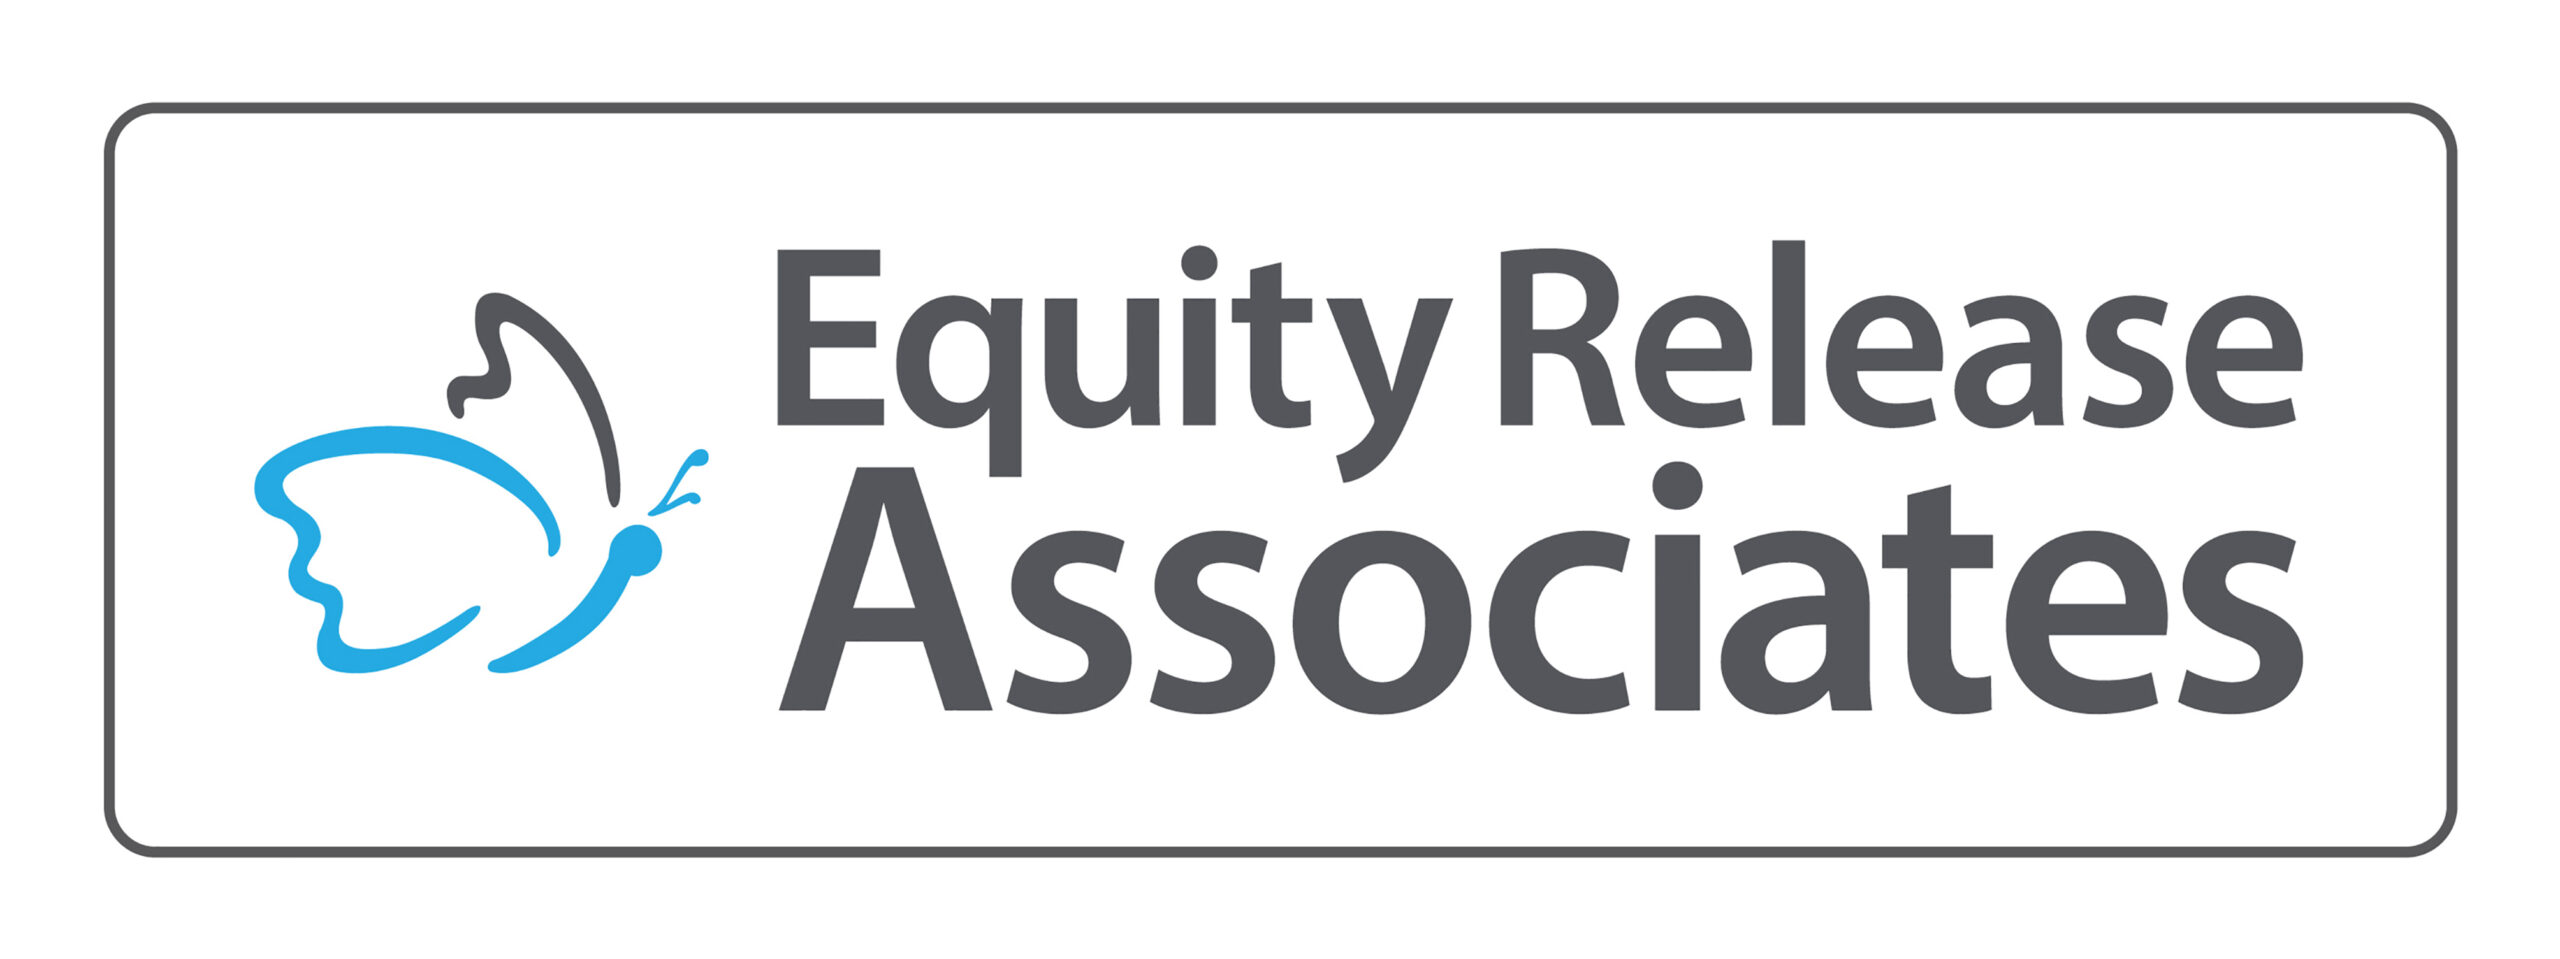 AP02725 The Equity Release Associates